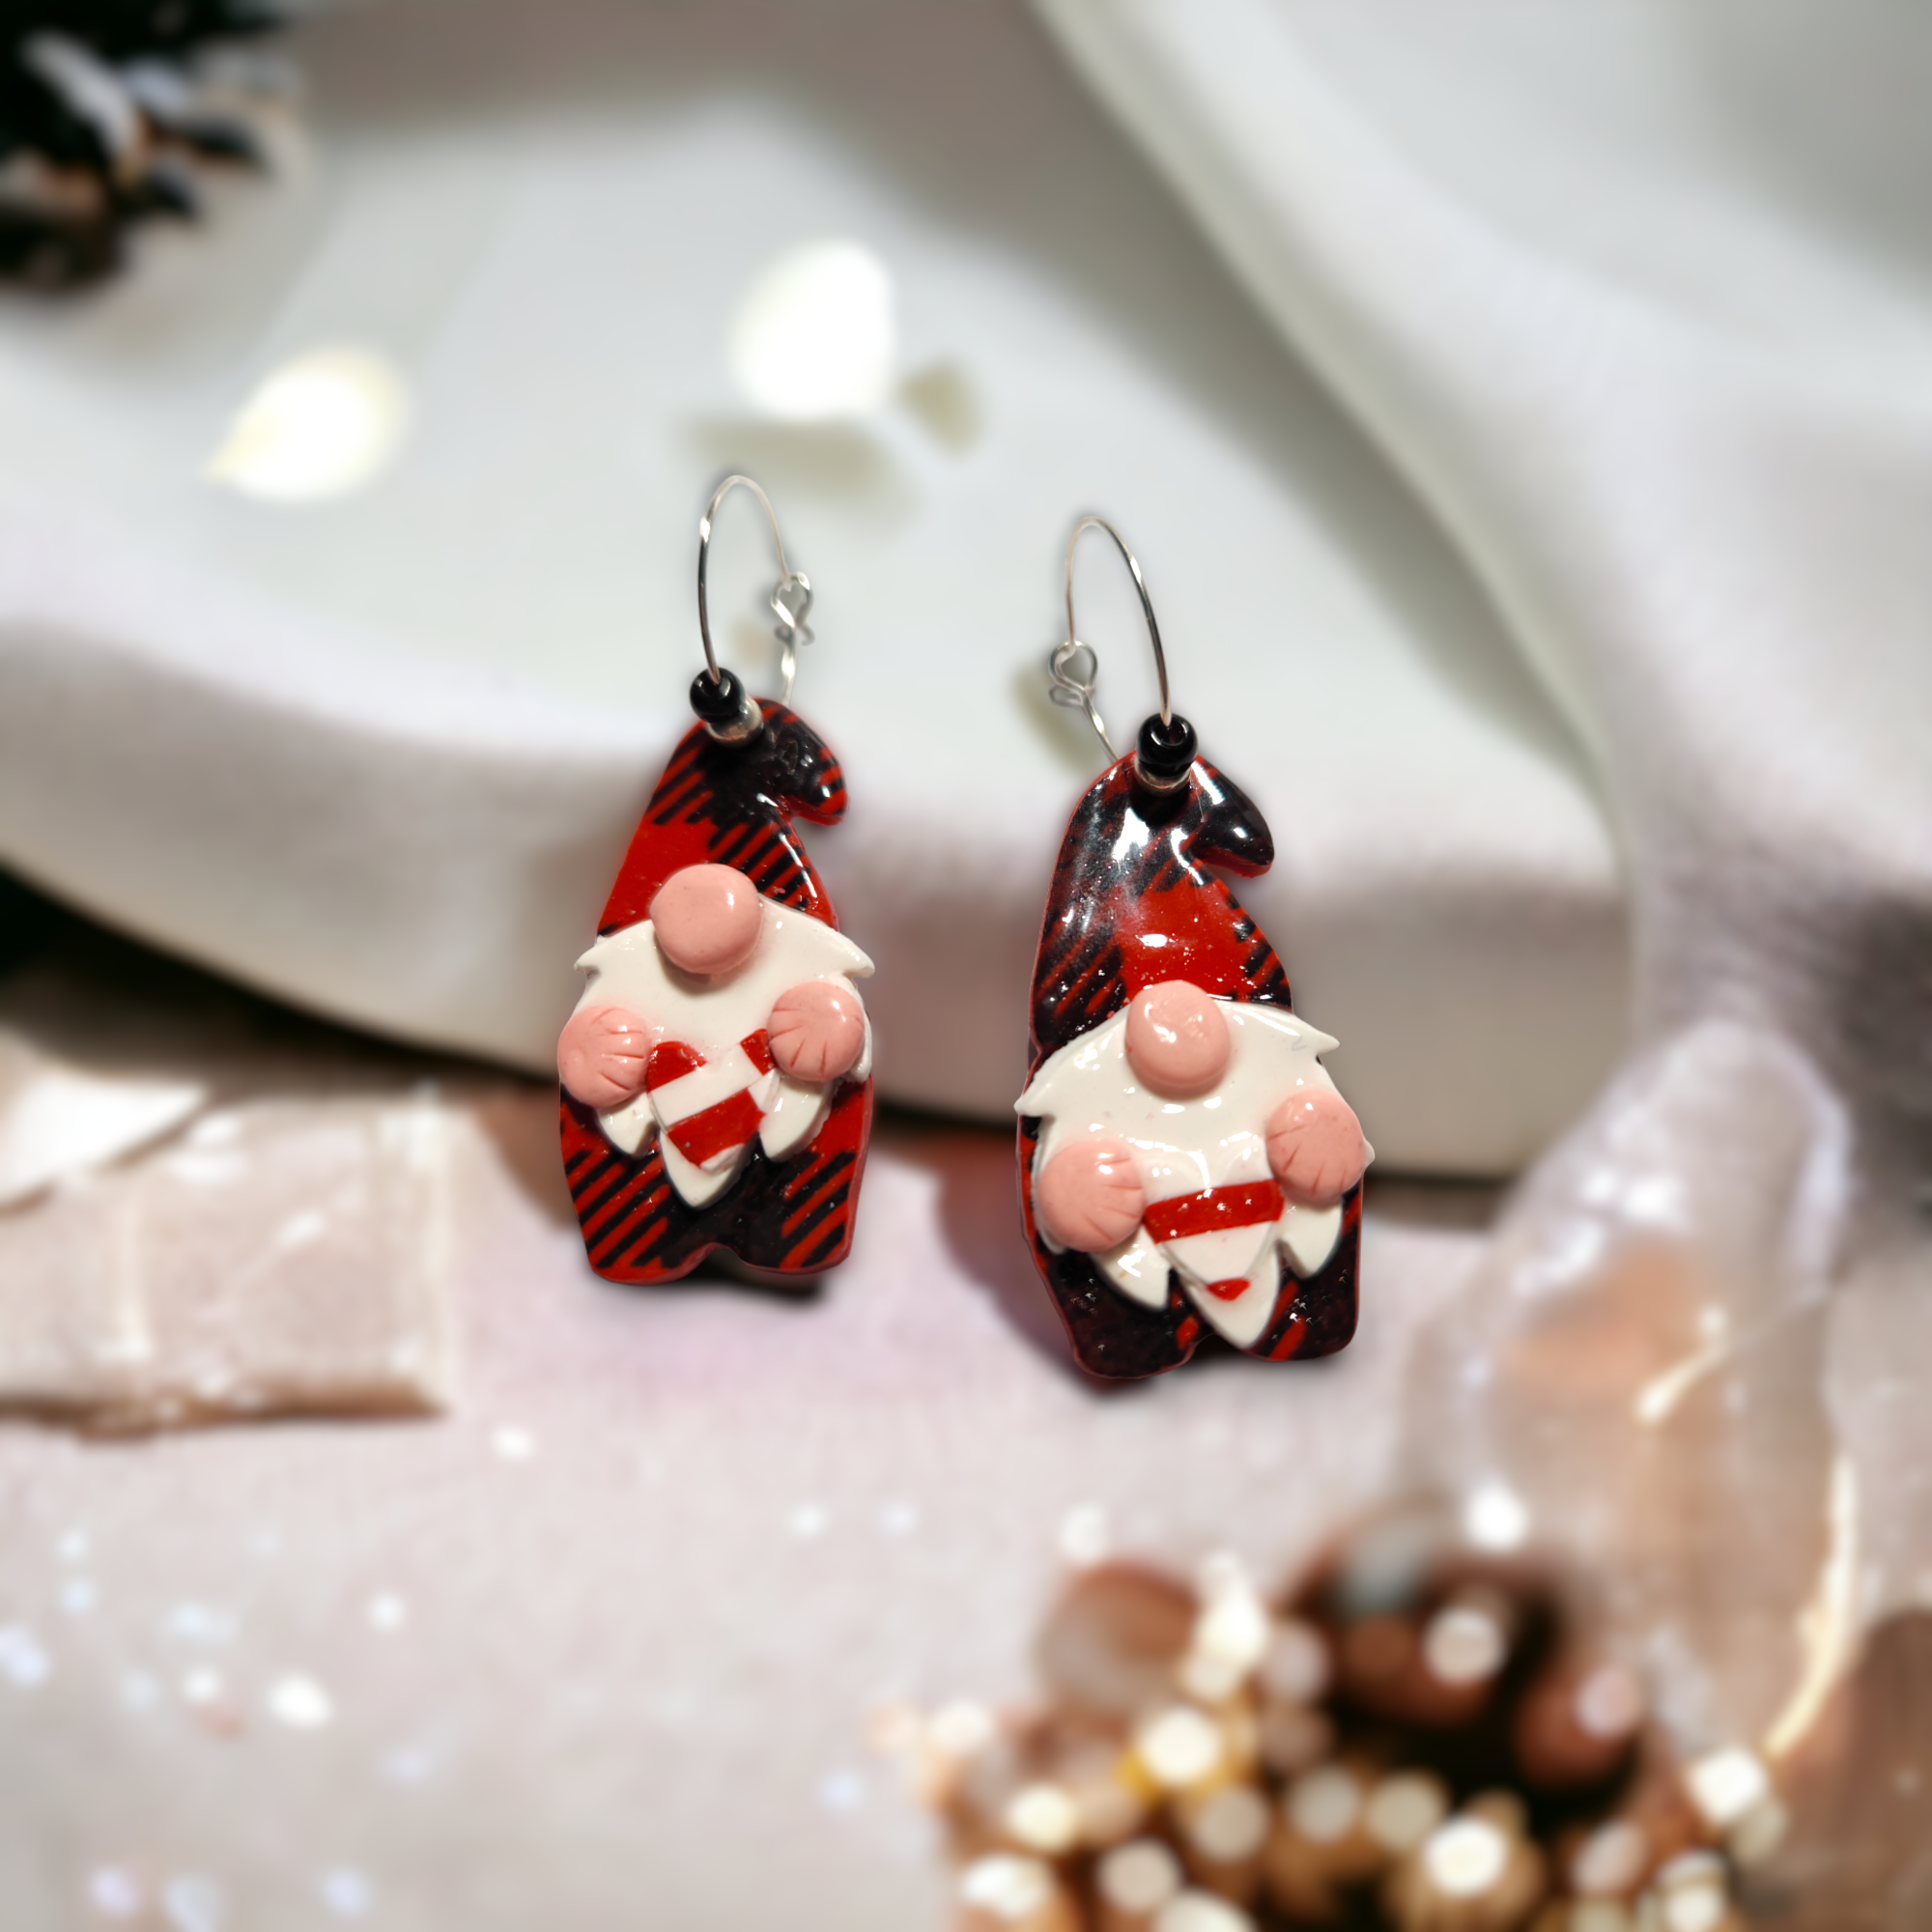 Jewelry :: Earrings :: Dangle & Drop Earrings :: Adorable Polymer Clay  Gnome Dangle Earrings. Hoop ear wires and glass beads. Handcrafted.